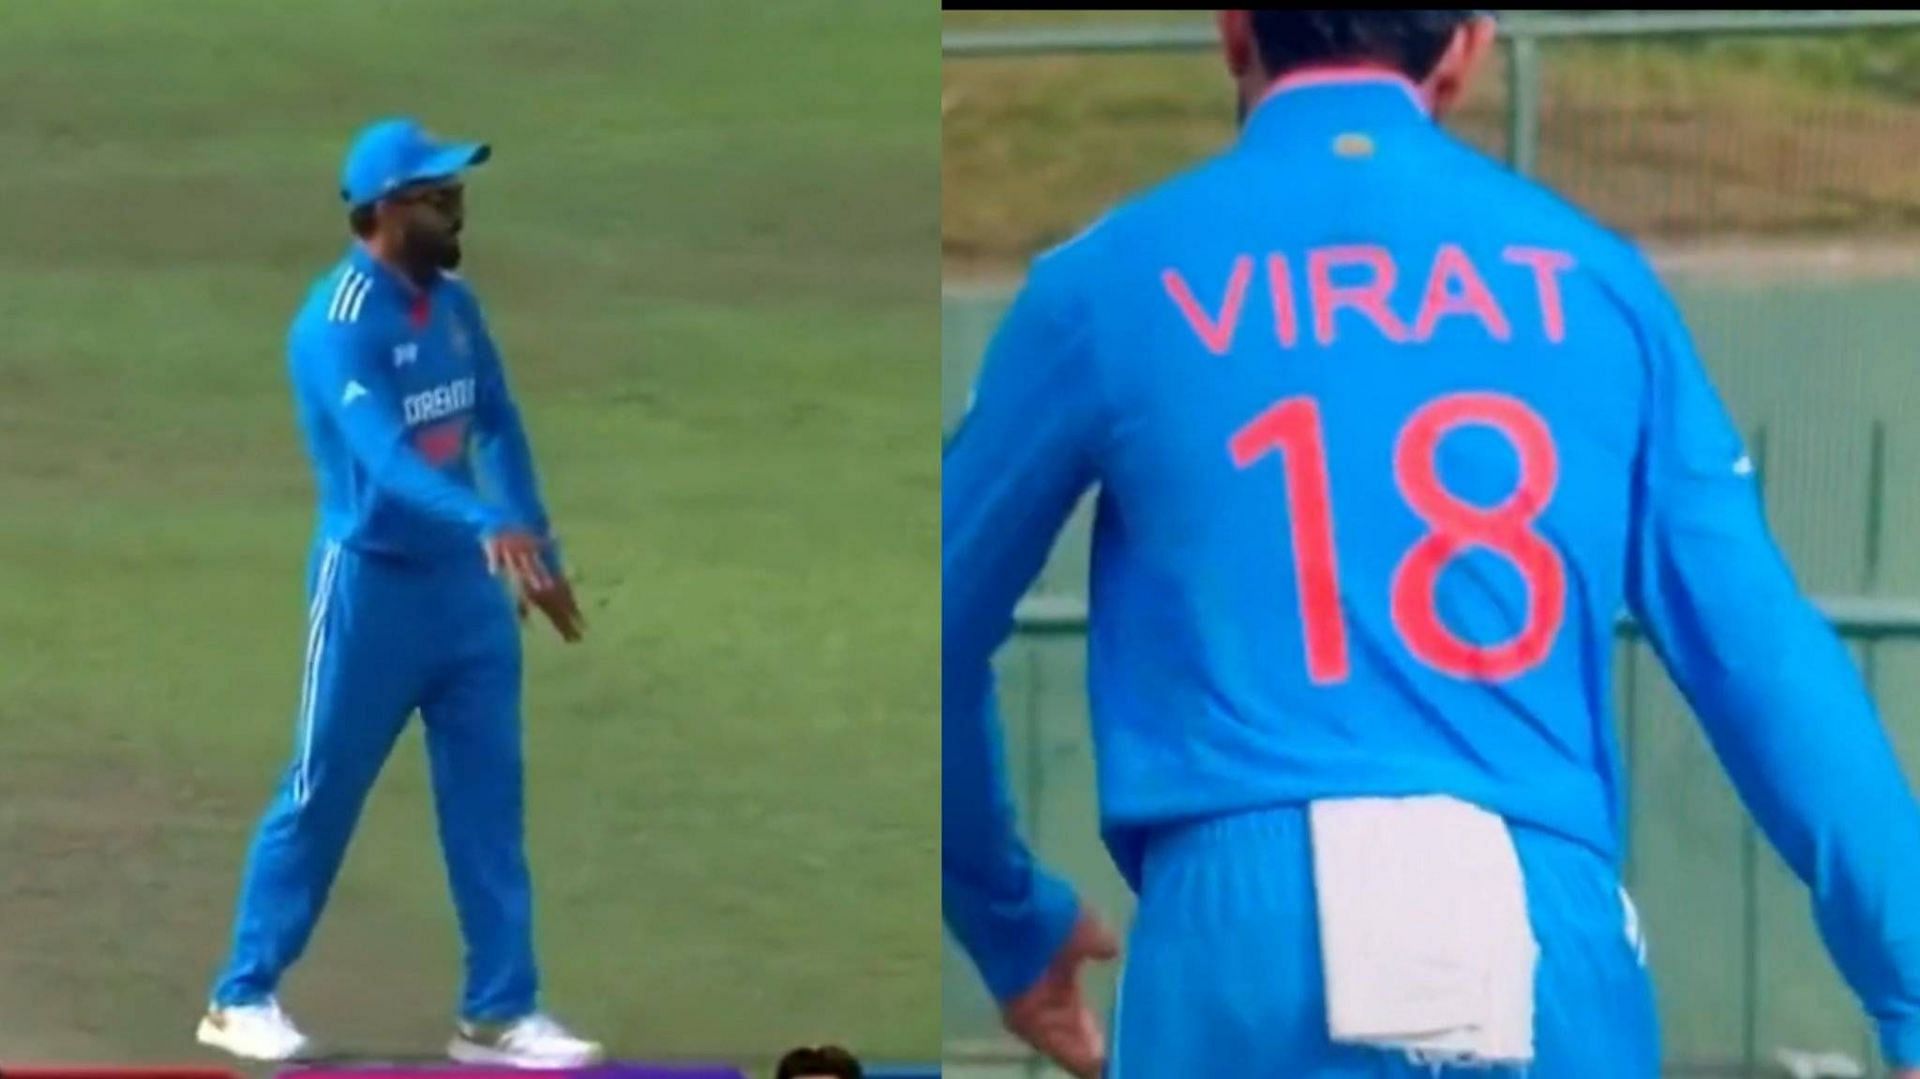 Virat Kohli is playing his first match against Nepal (Image: X)